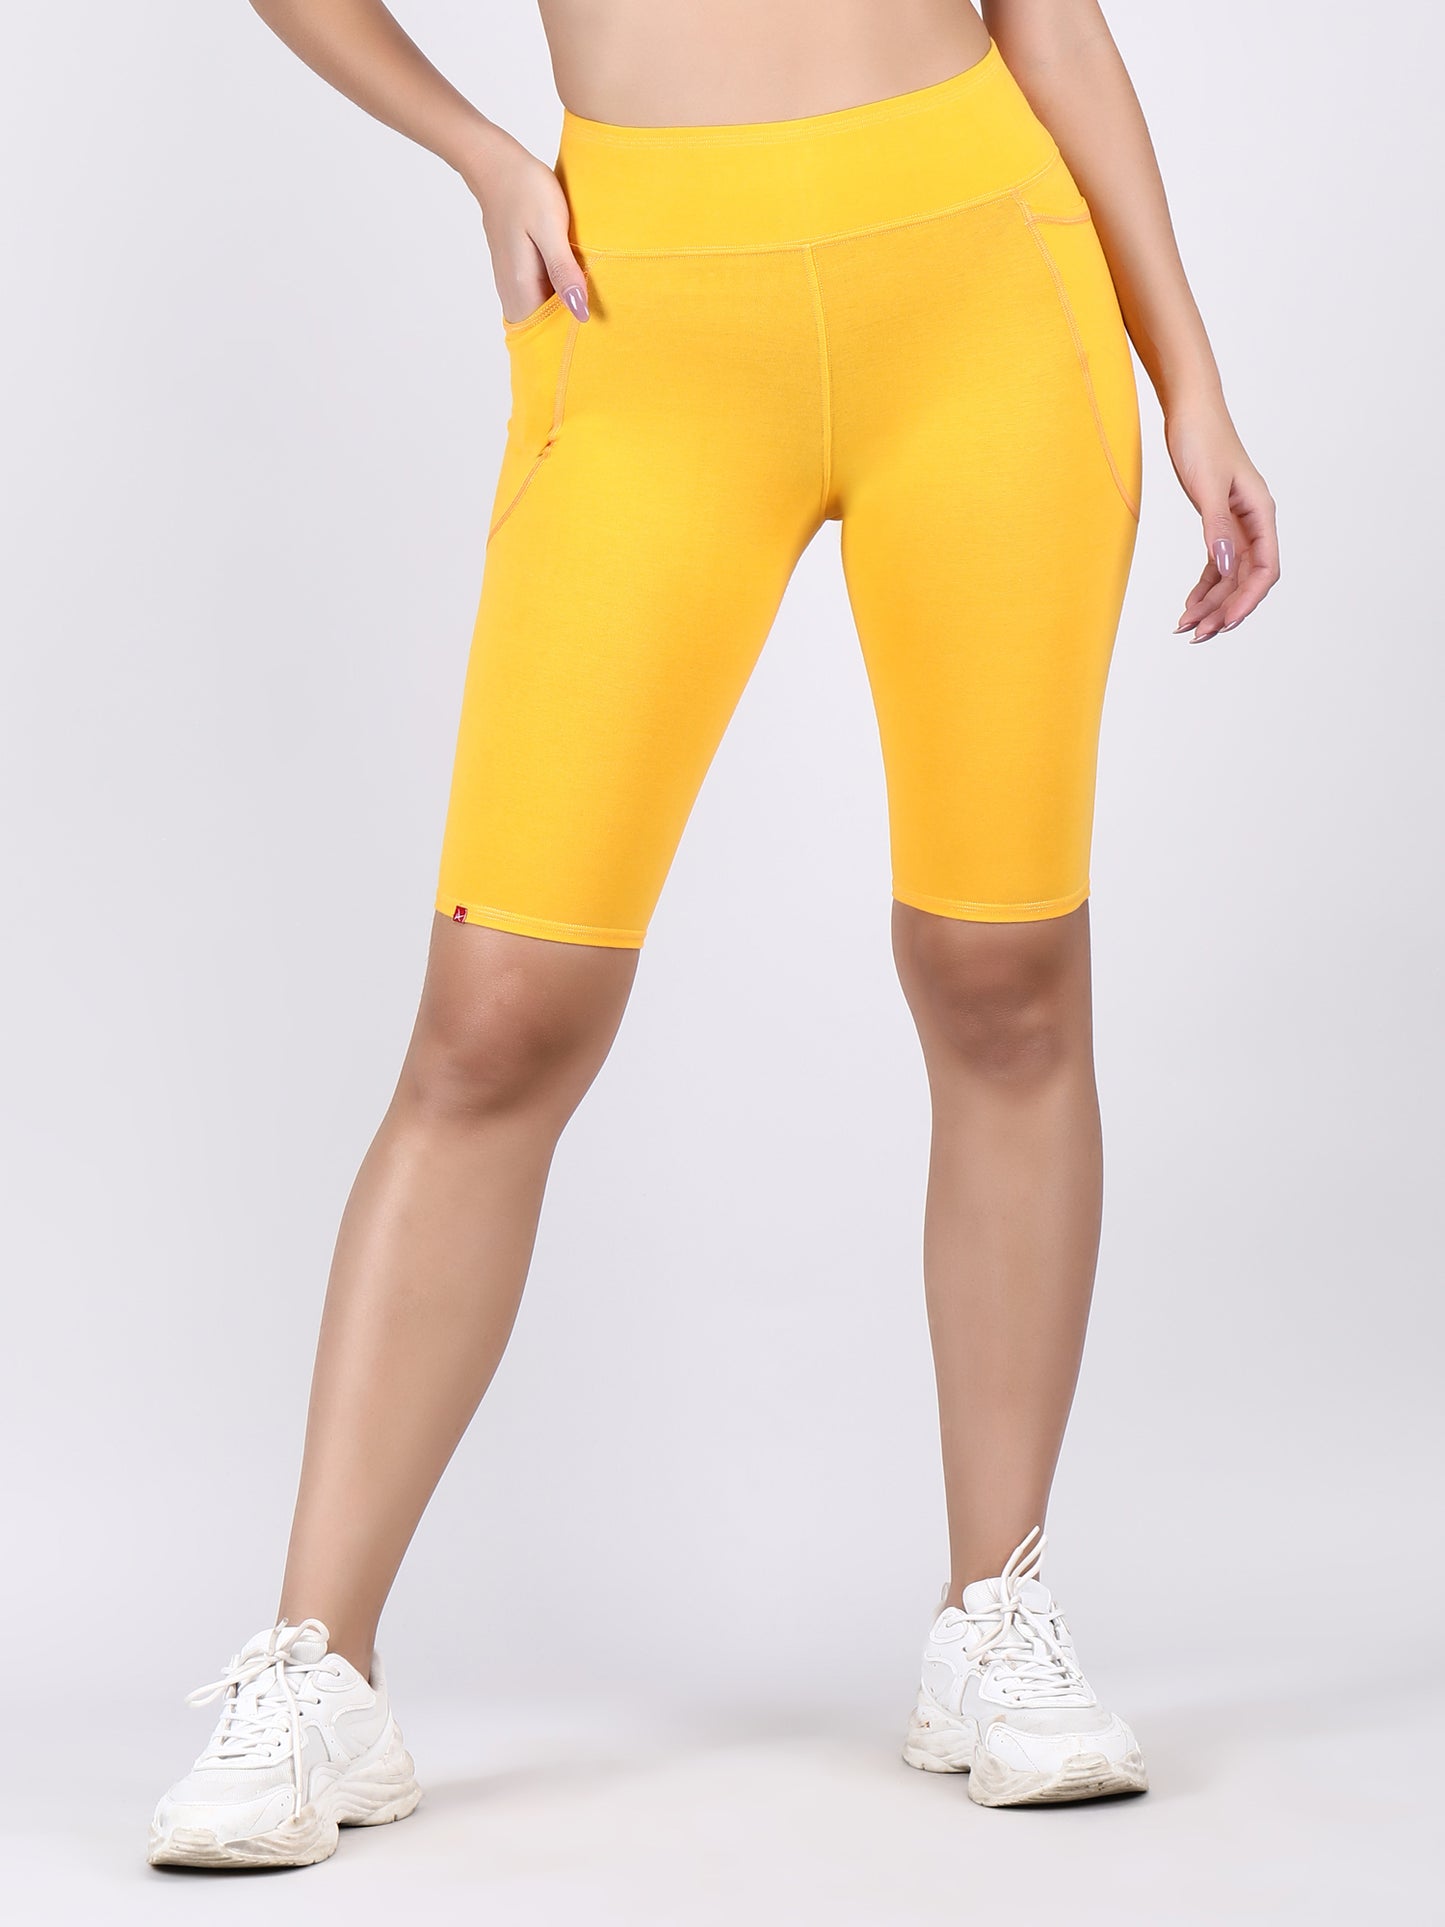 Adorna Shapparel Cycling Shorts for women with Thigh Shaping - Golden Yellow